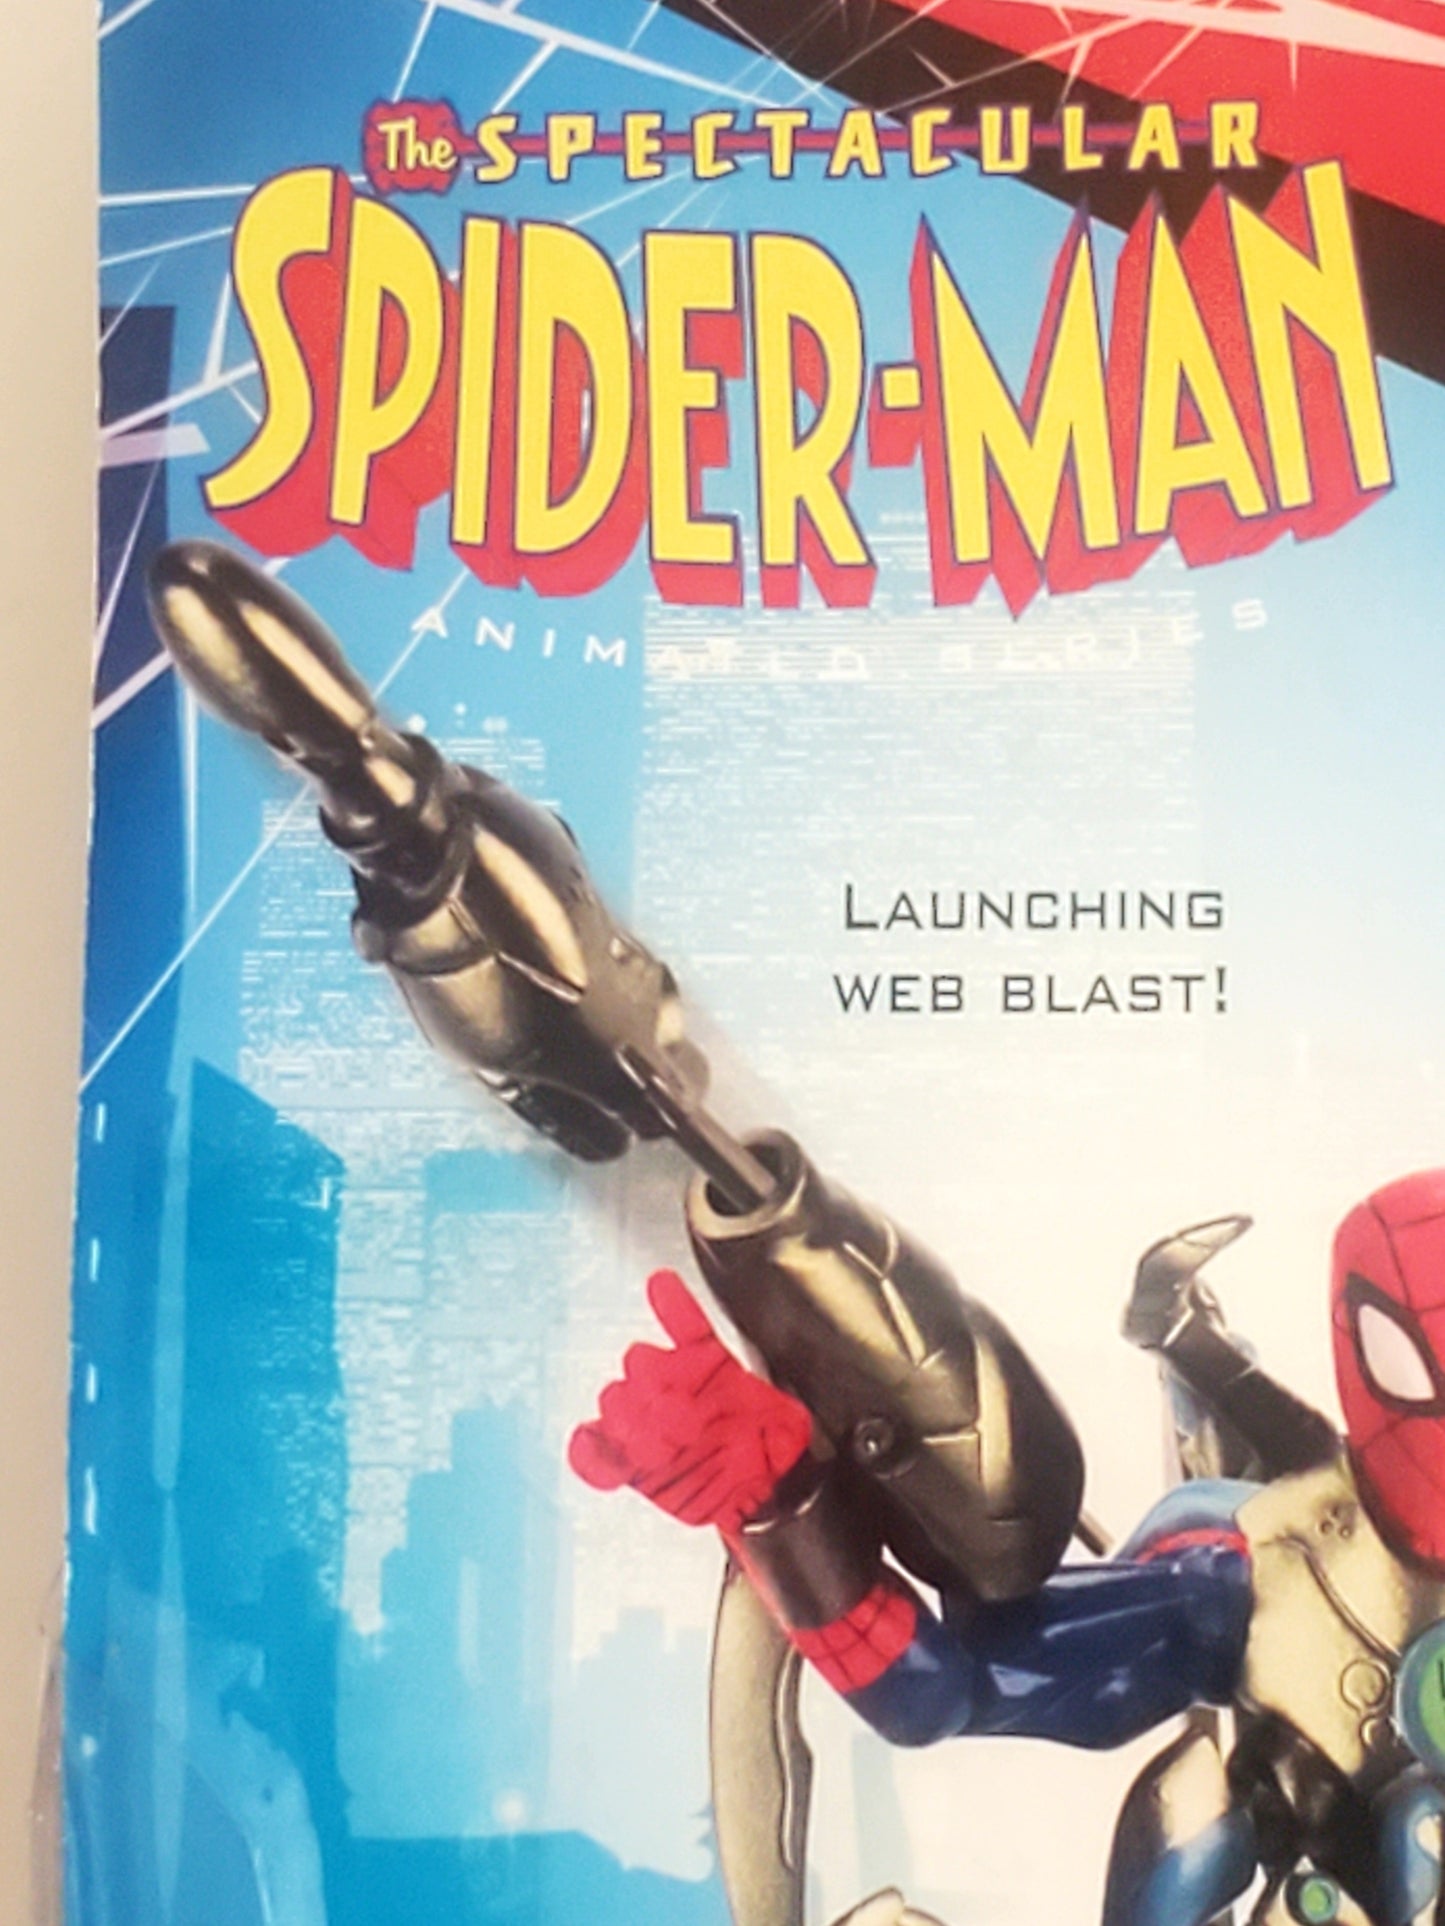 Spider-Man with Spider Armor Action Figure from the Spectacular Spider-Man Animated Series